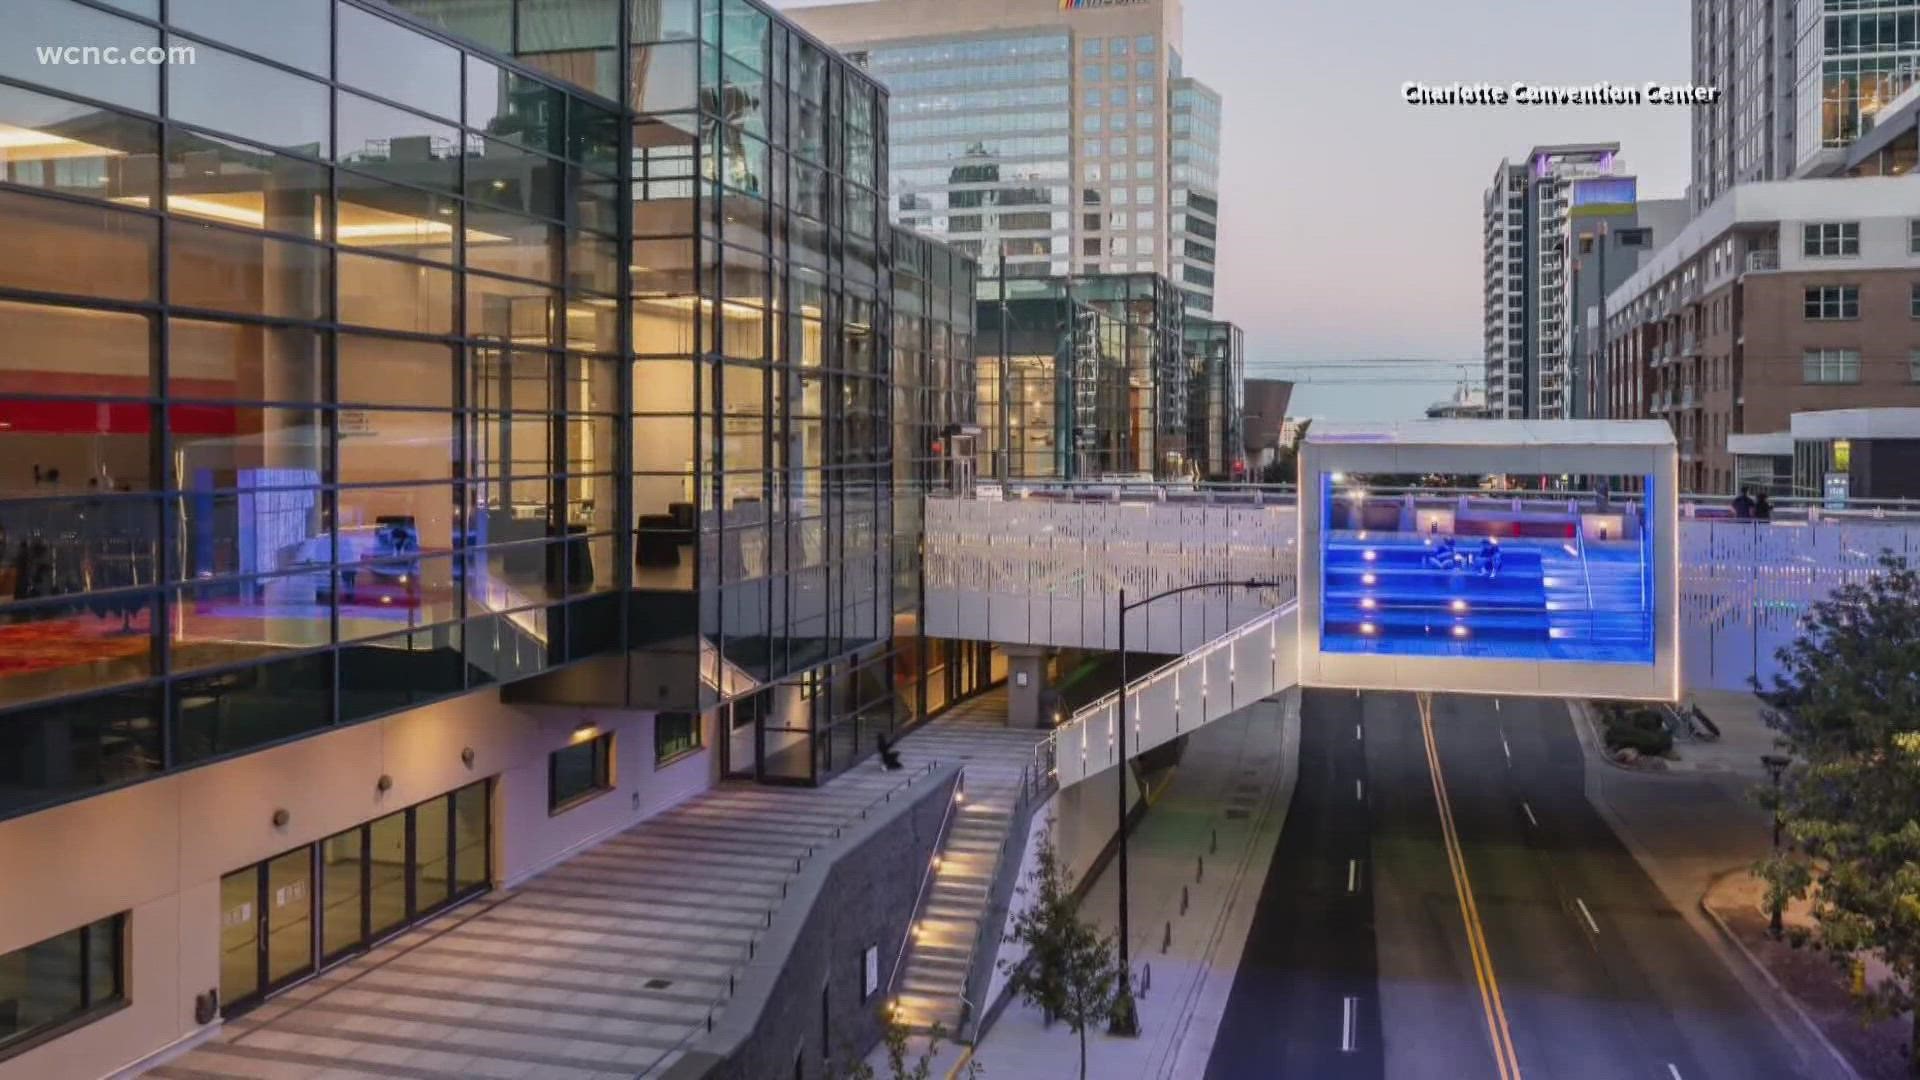 The Charlotte Convention Center's expansion project is over, and a new and more modern section was officially opened on Thursday.